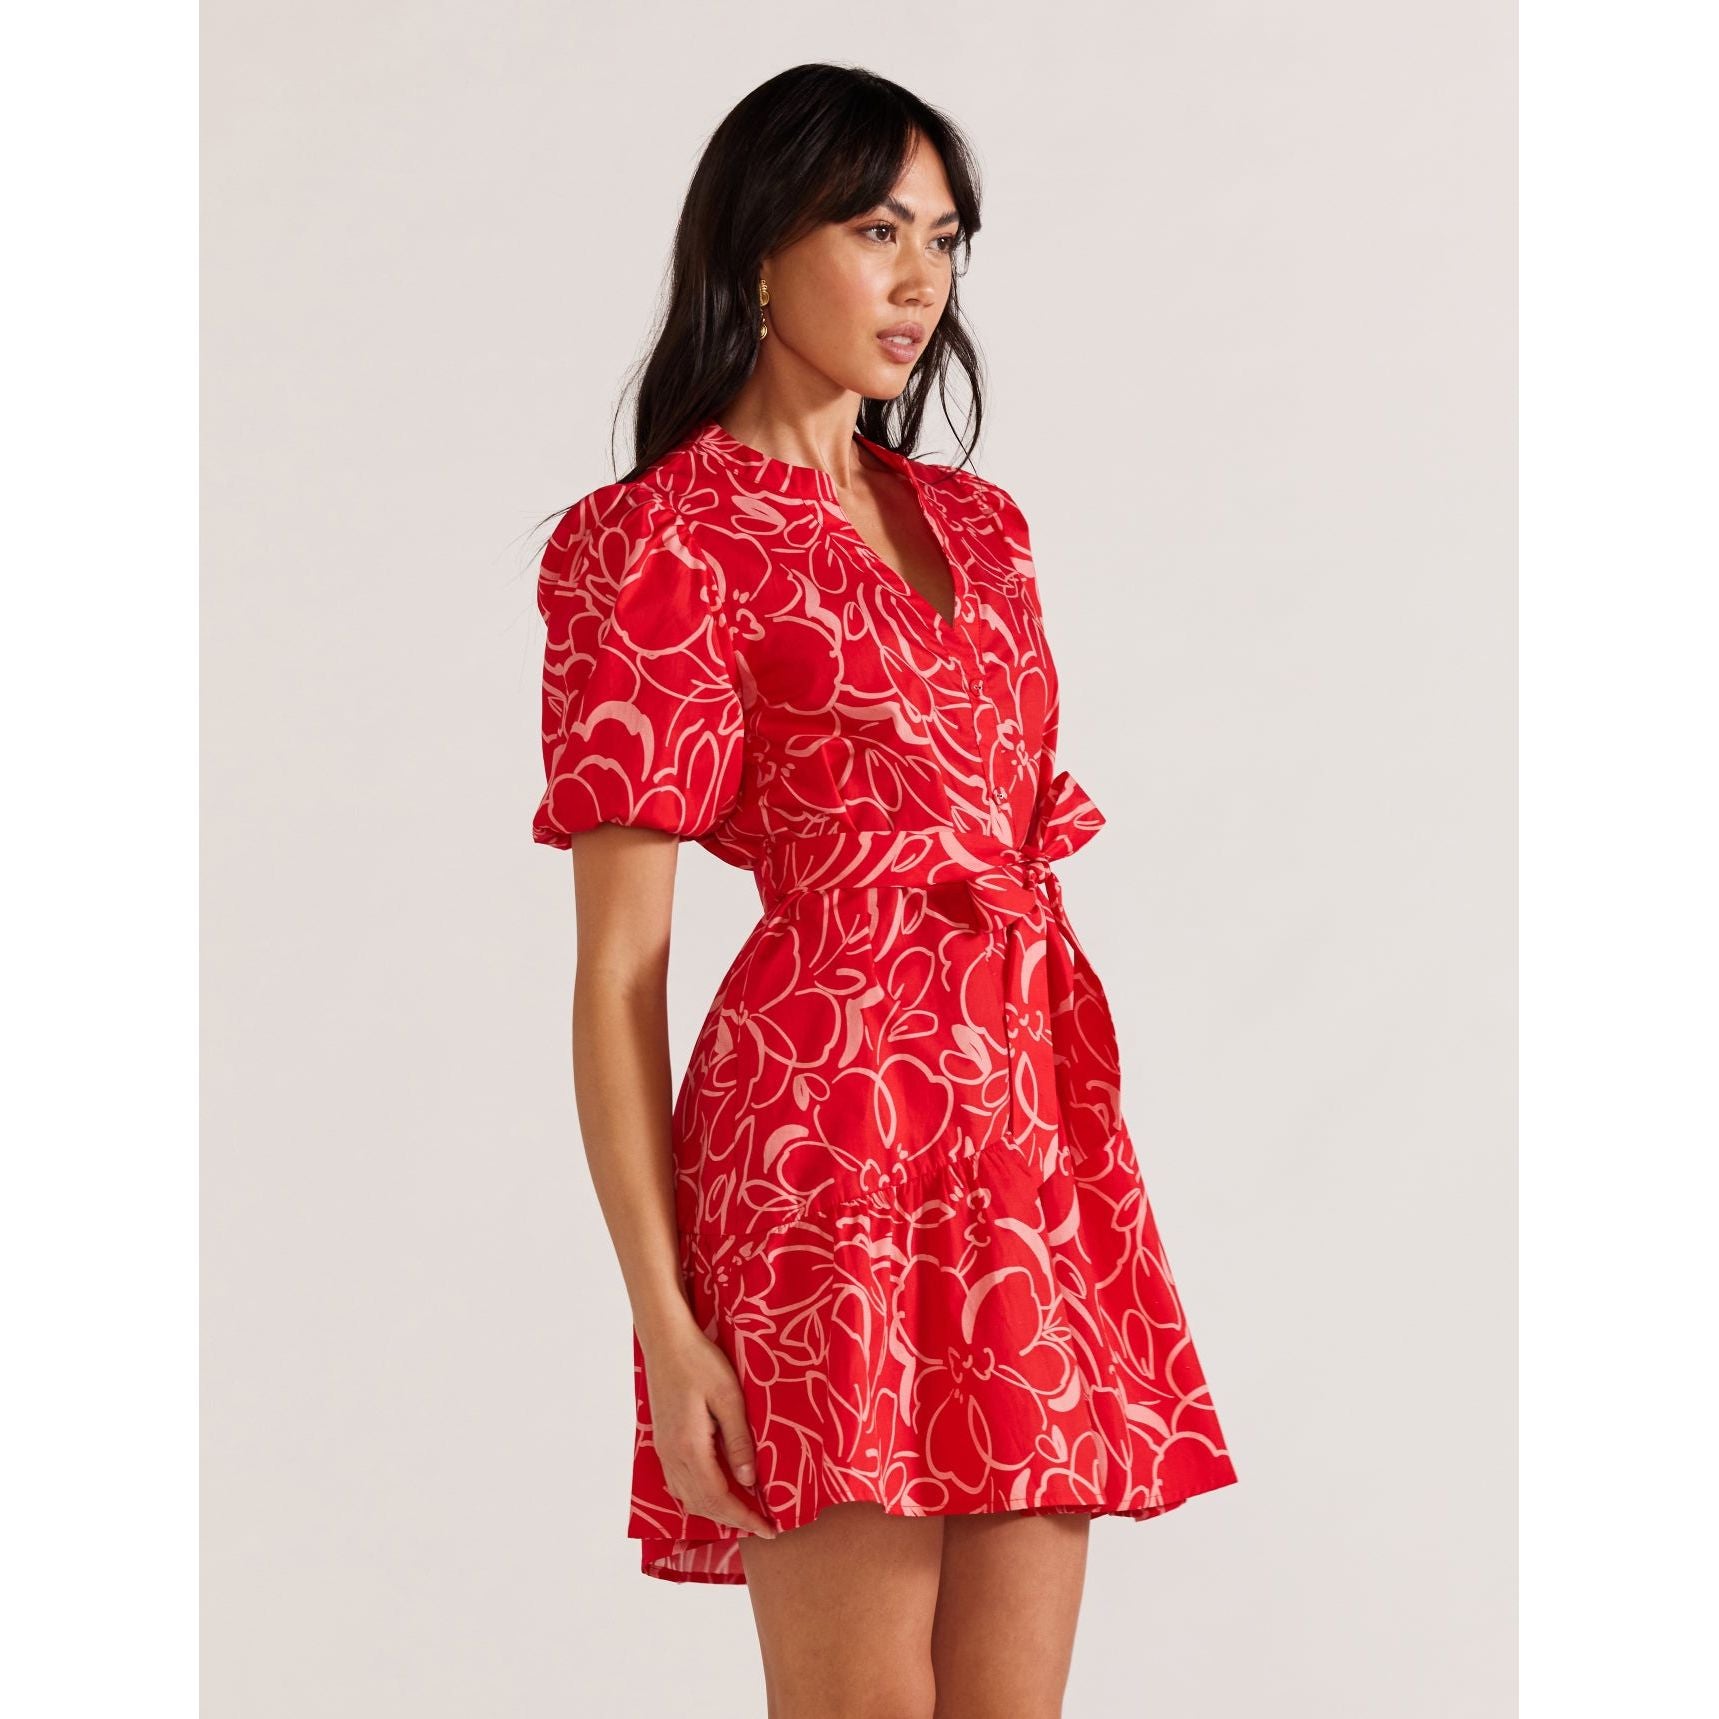 Palermo Mini Dress - Red Floral